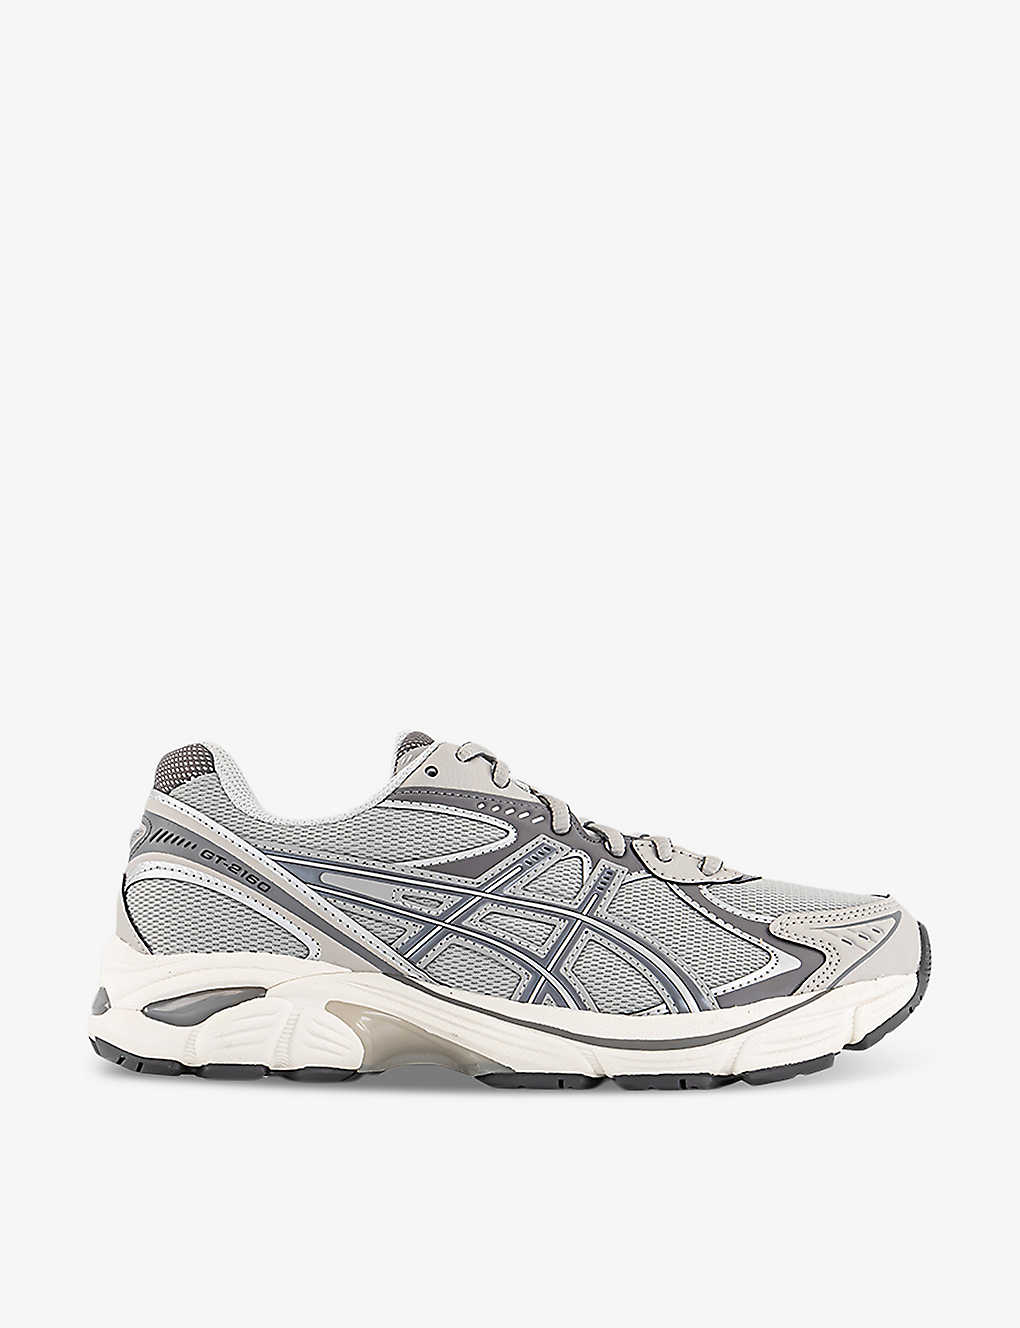 Asics Gt-2160 In Oyster Grey Carbon